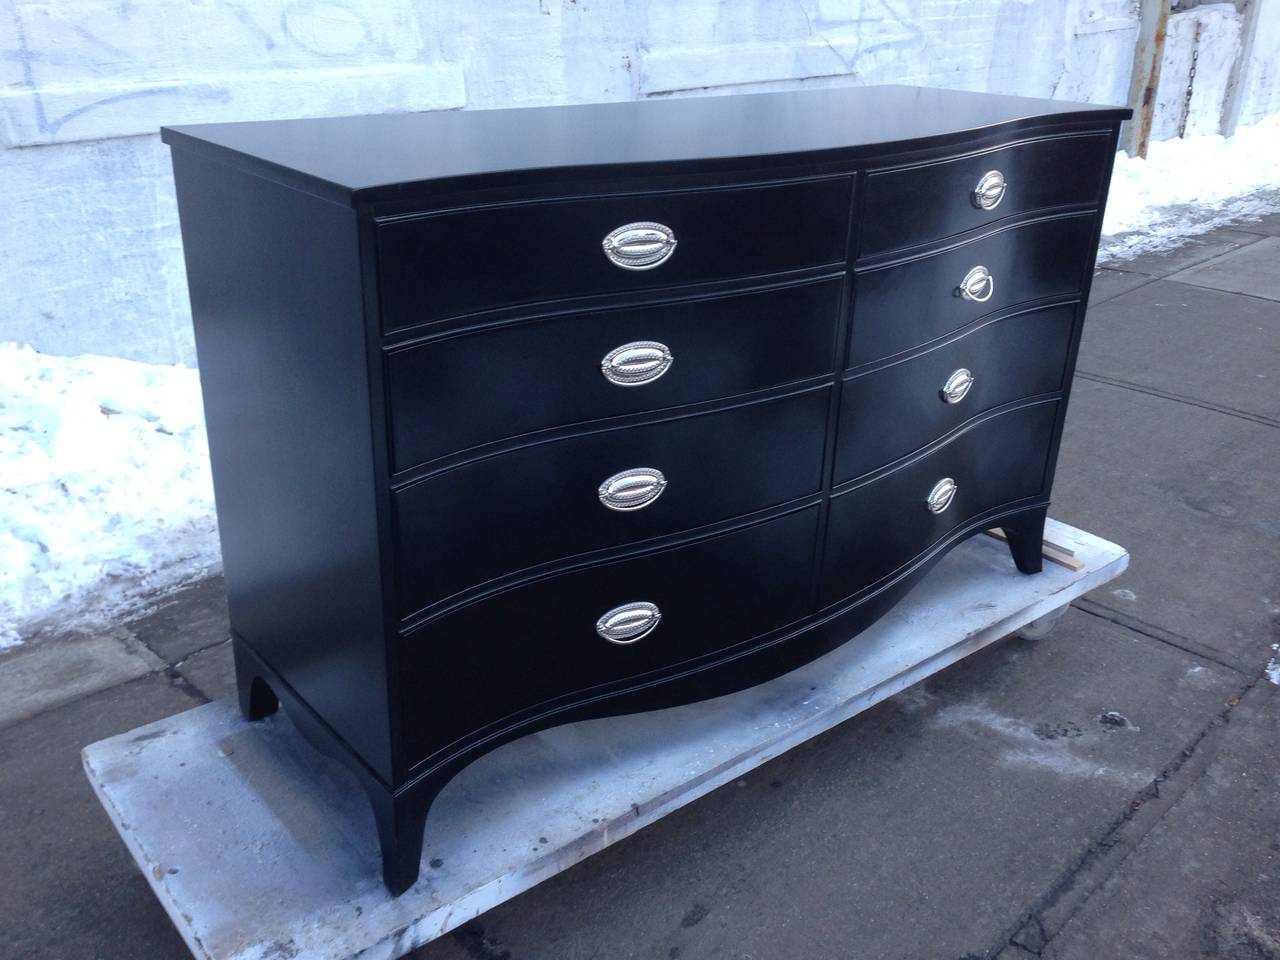 Wave front eight-drawer black dresser with nickel pulls, with miniature Klismos legs.  The blue is the reflection of the sky.
